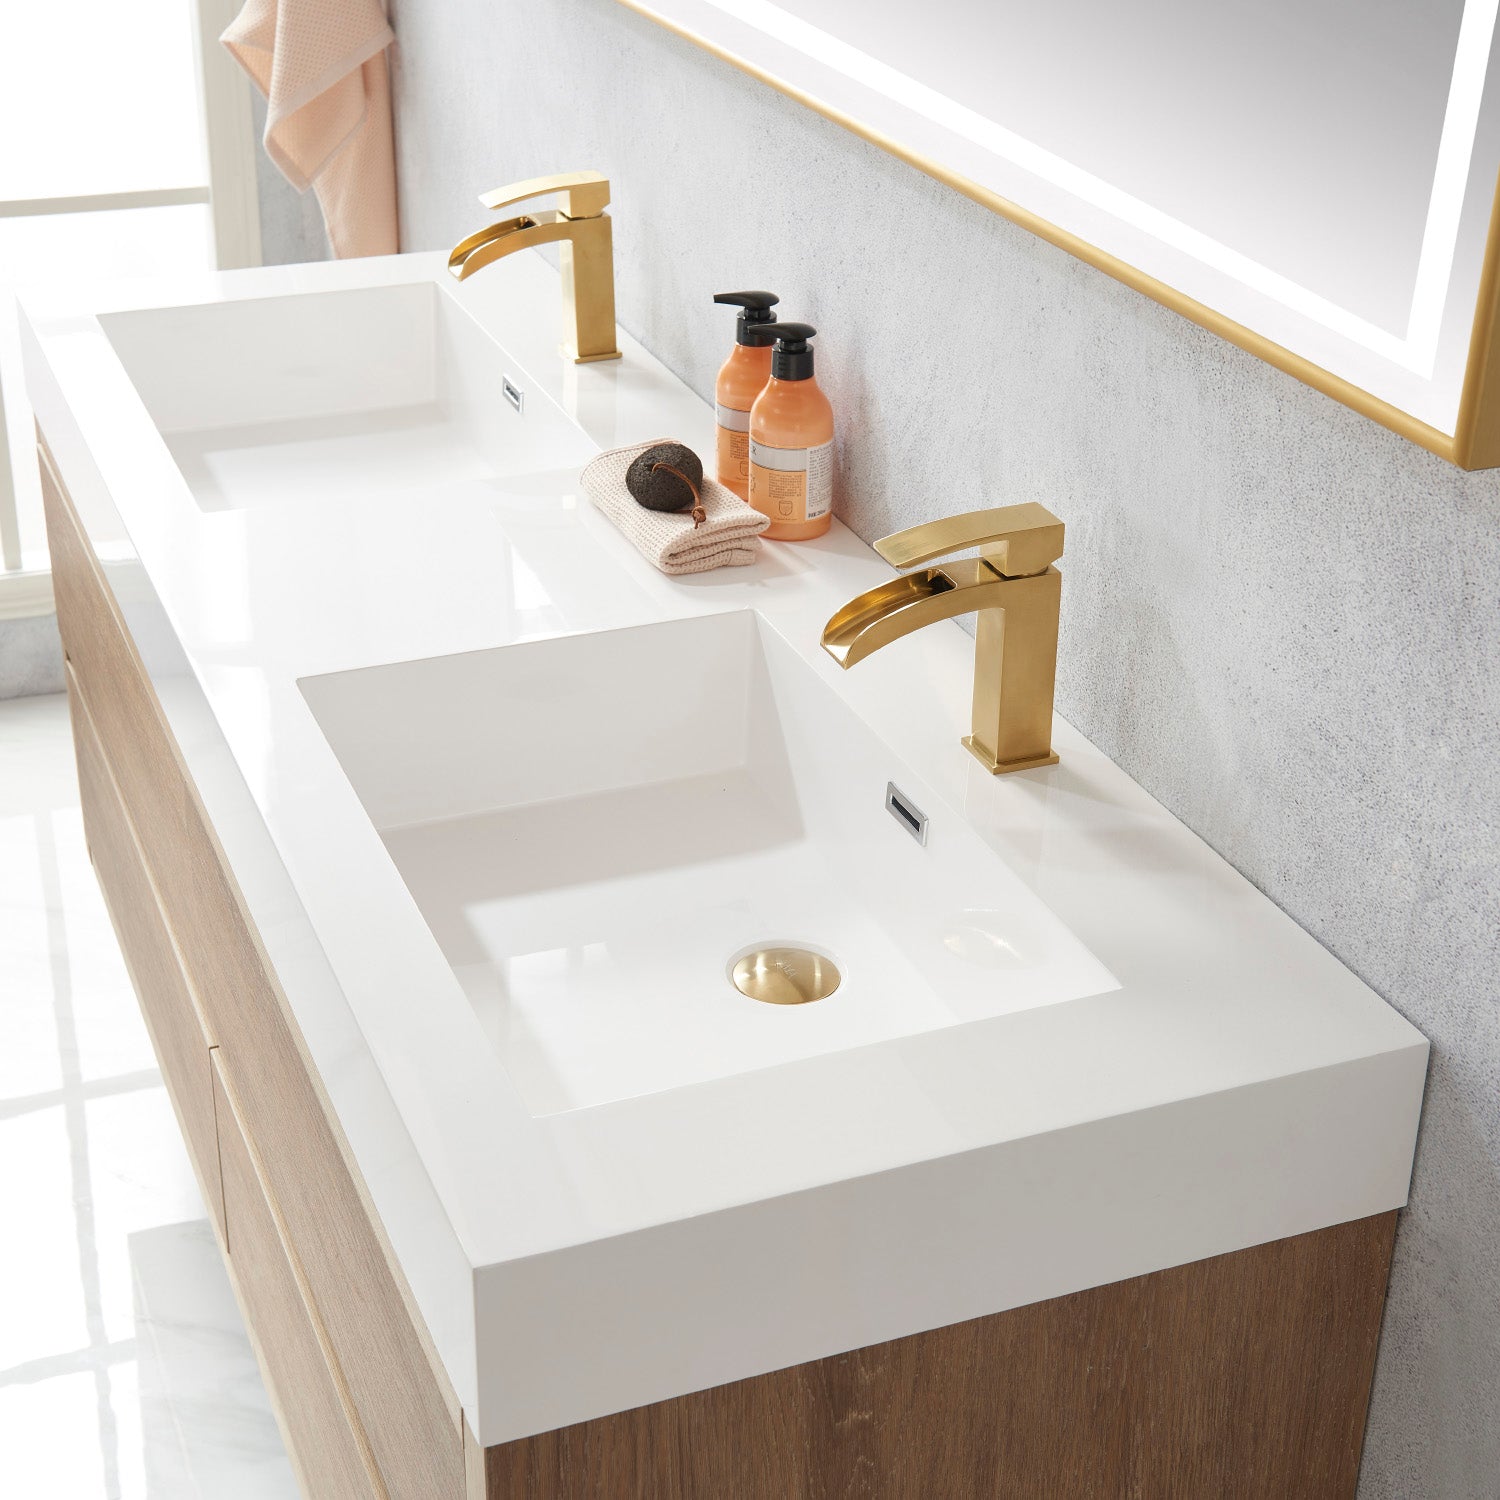 Palencia 60M" Double Sink Wall-Mount Bath Vanity in North American Oak with White Composite Integral Square Sink Top